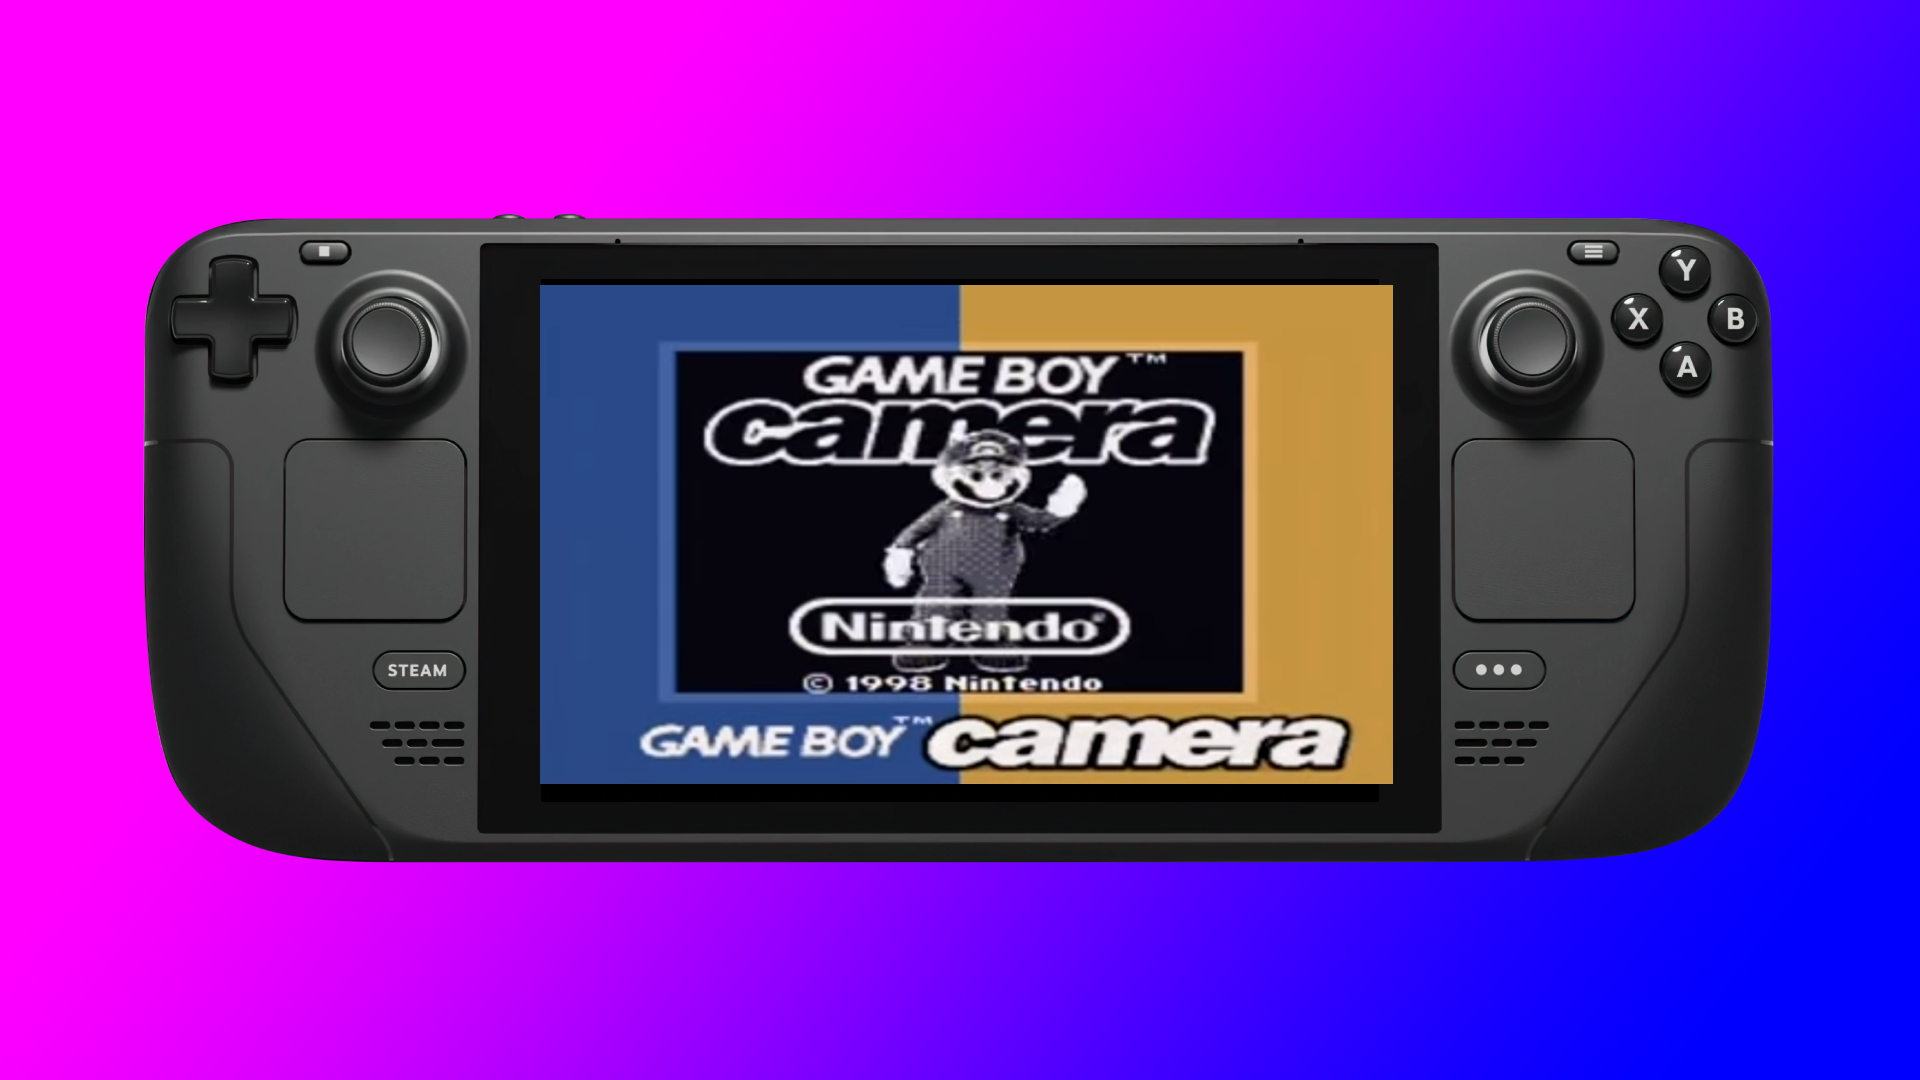 You can use the Steam Deck to take Gameboy Camera pictures